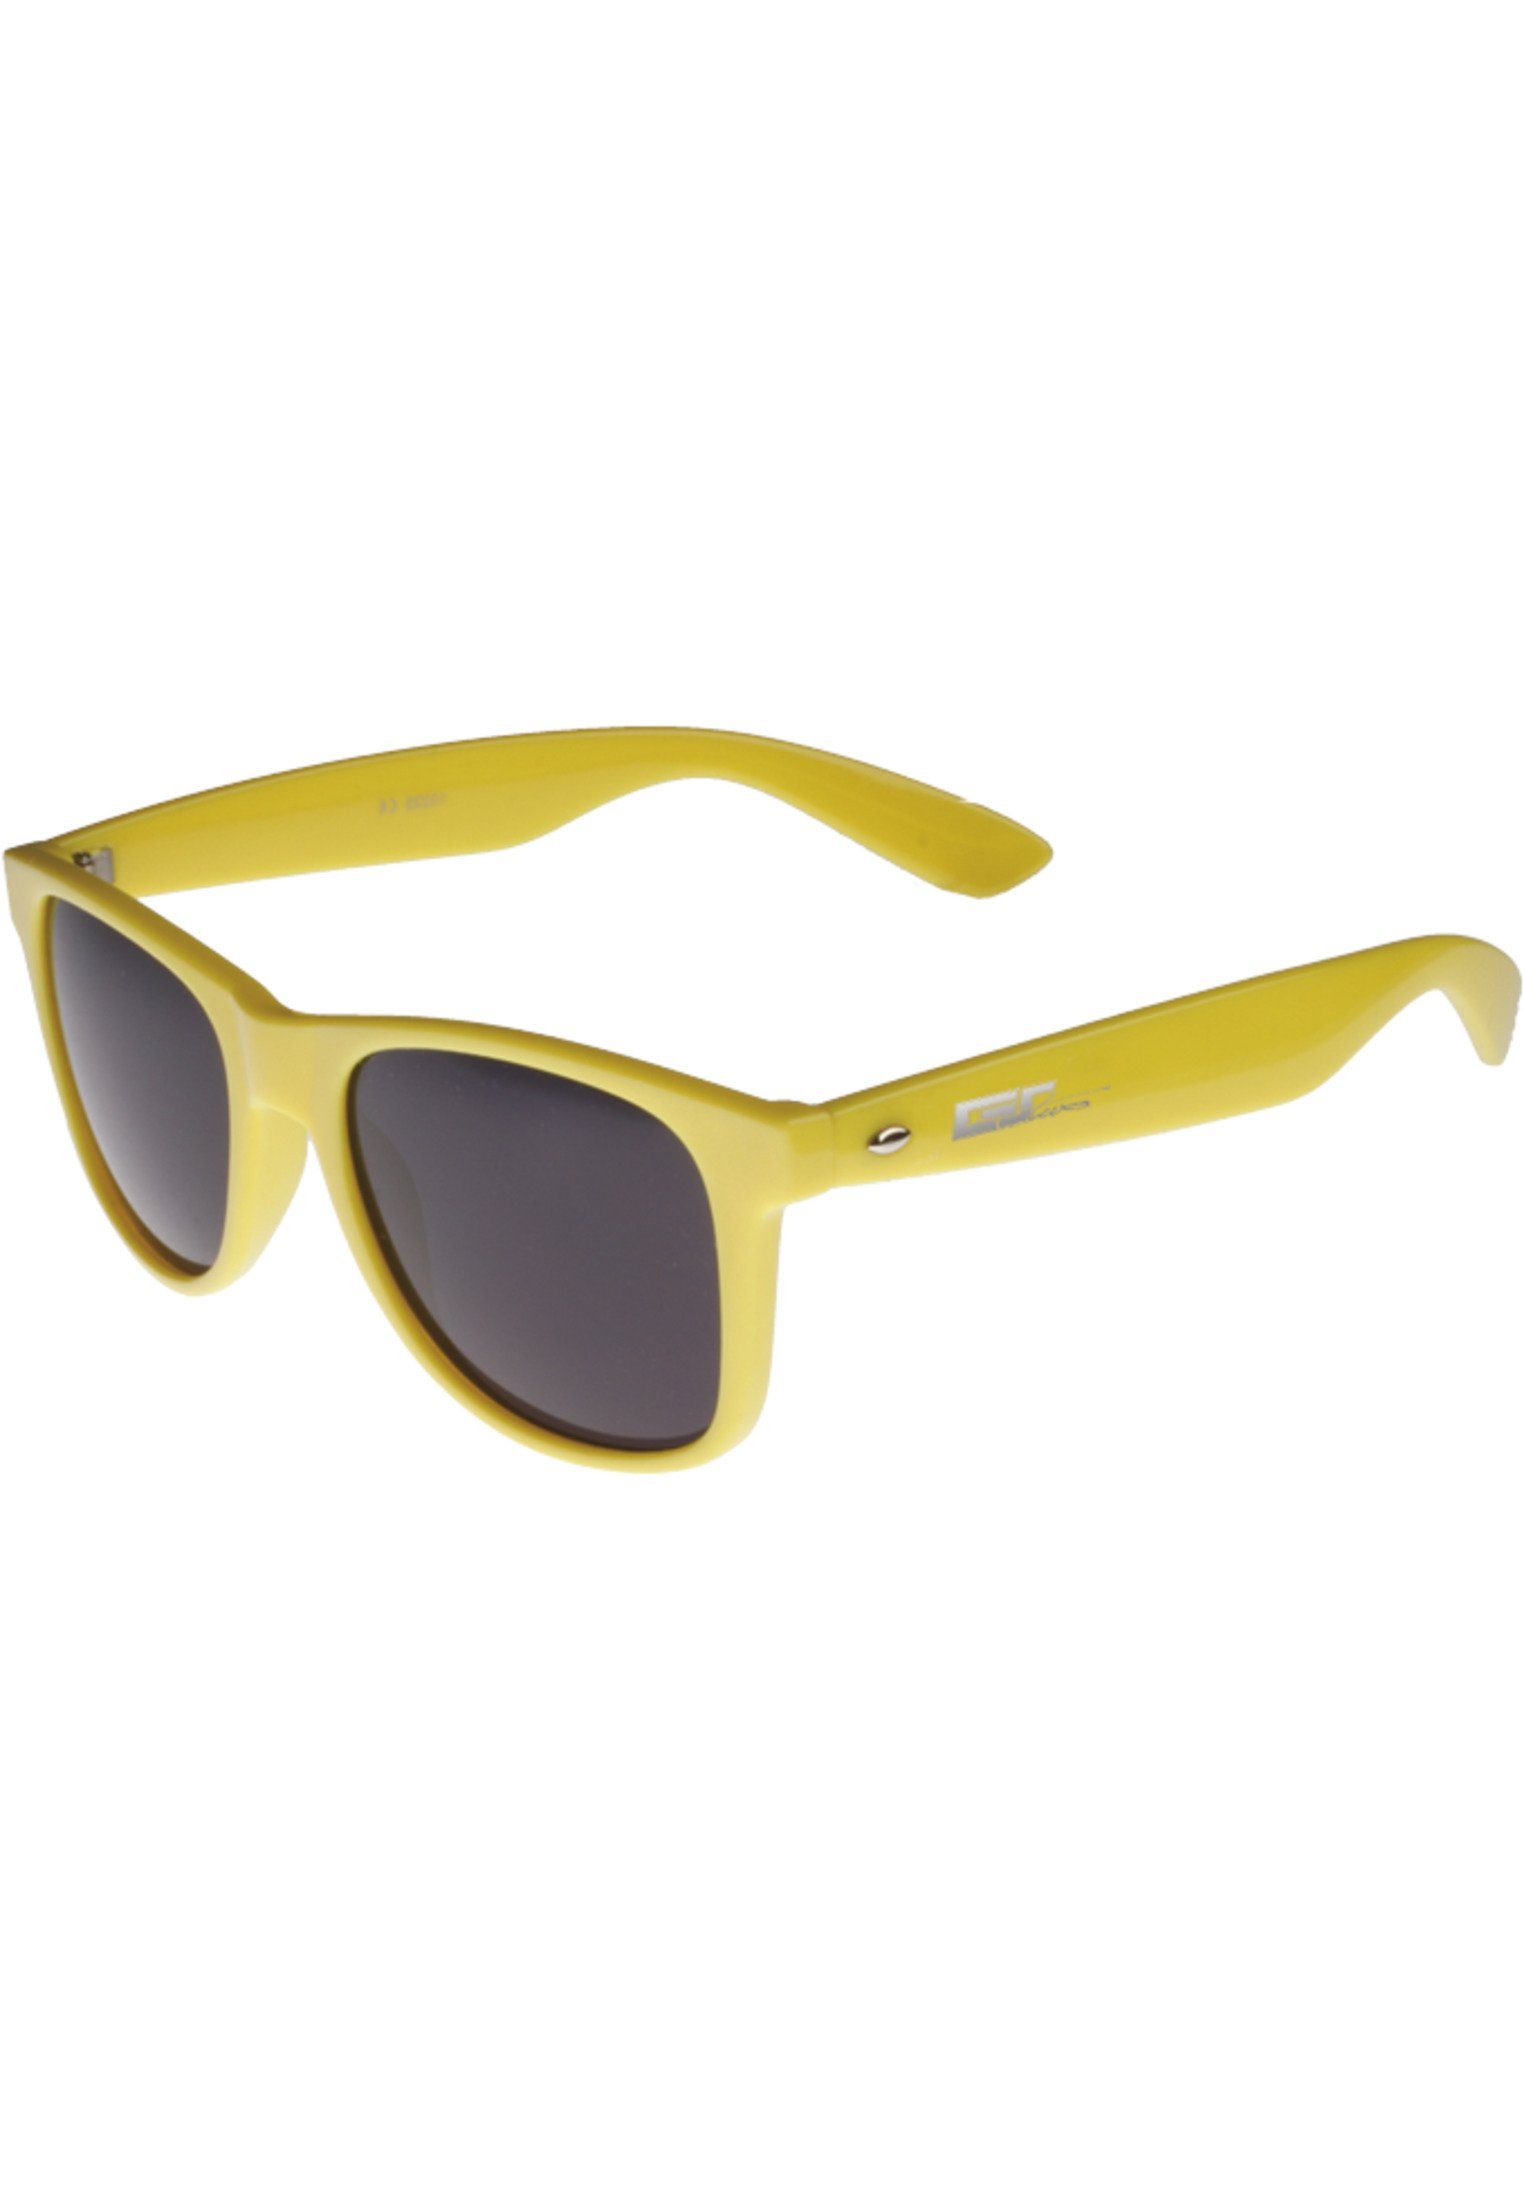 MSTRDS Sonnenbrille Accessoires Groove yellow GStwo Shades